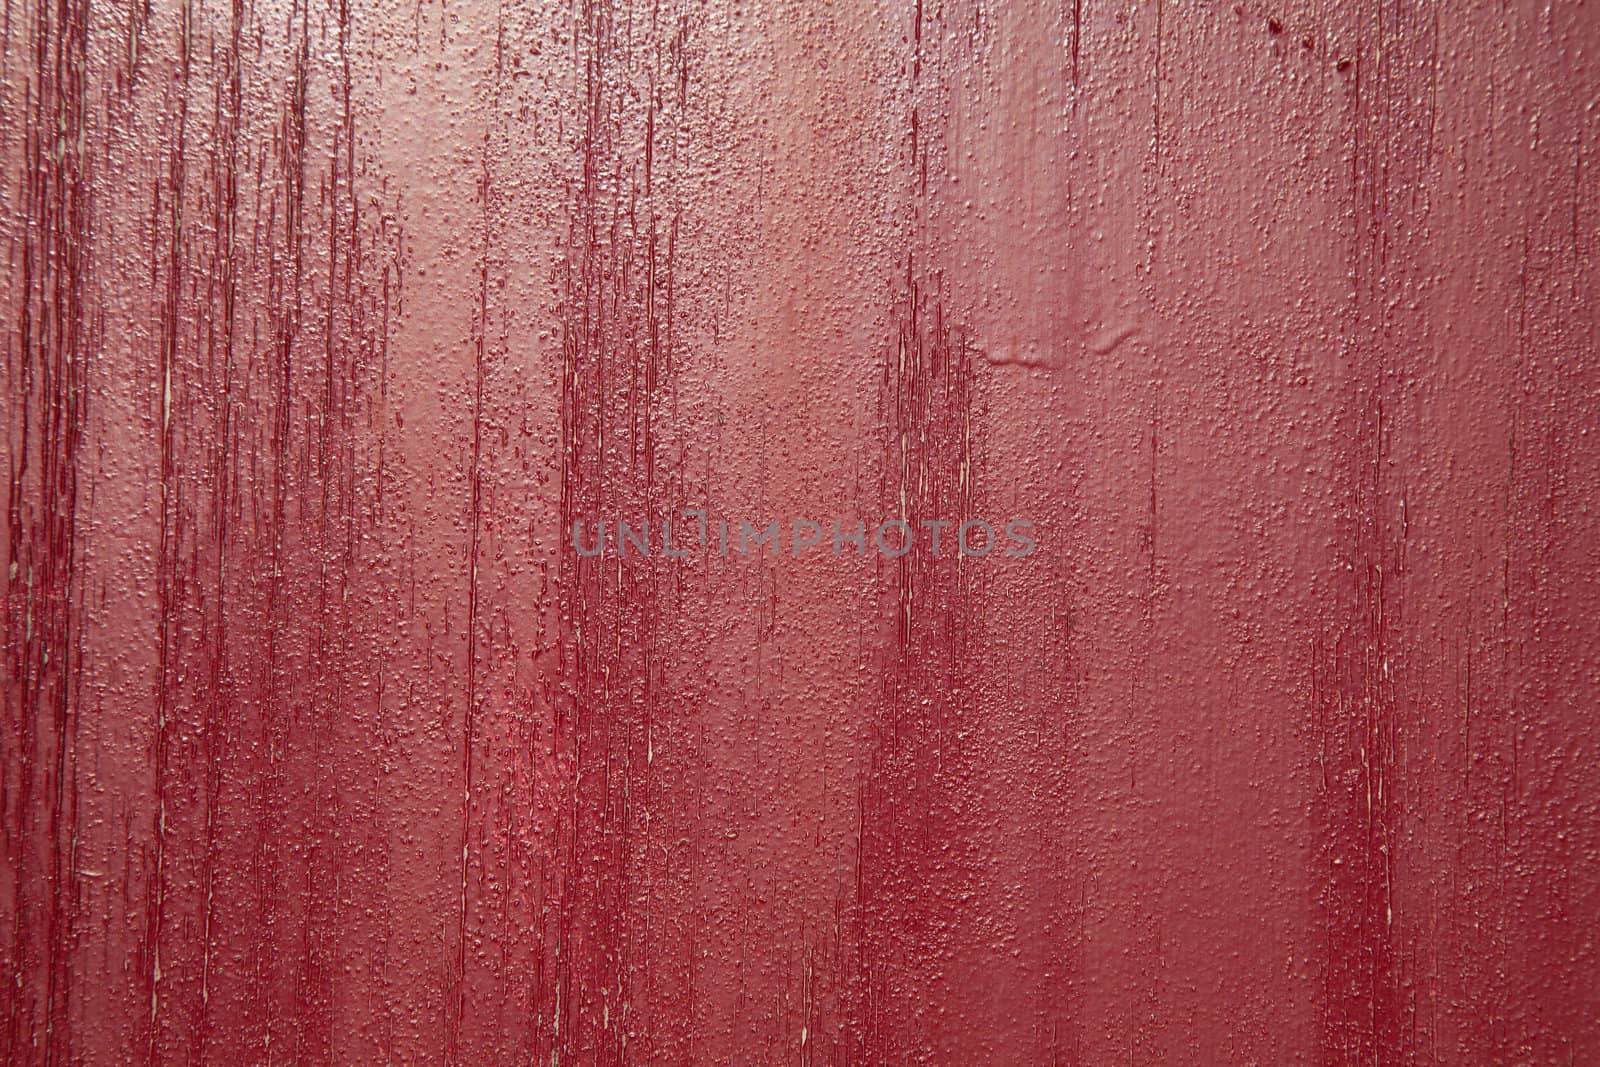 A background of red cracked and flaky  paint with vertical tones.